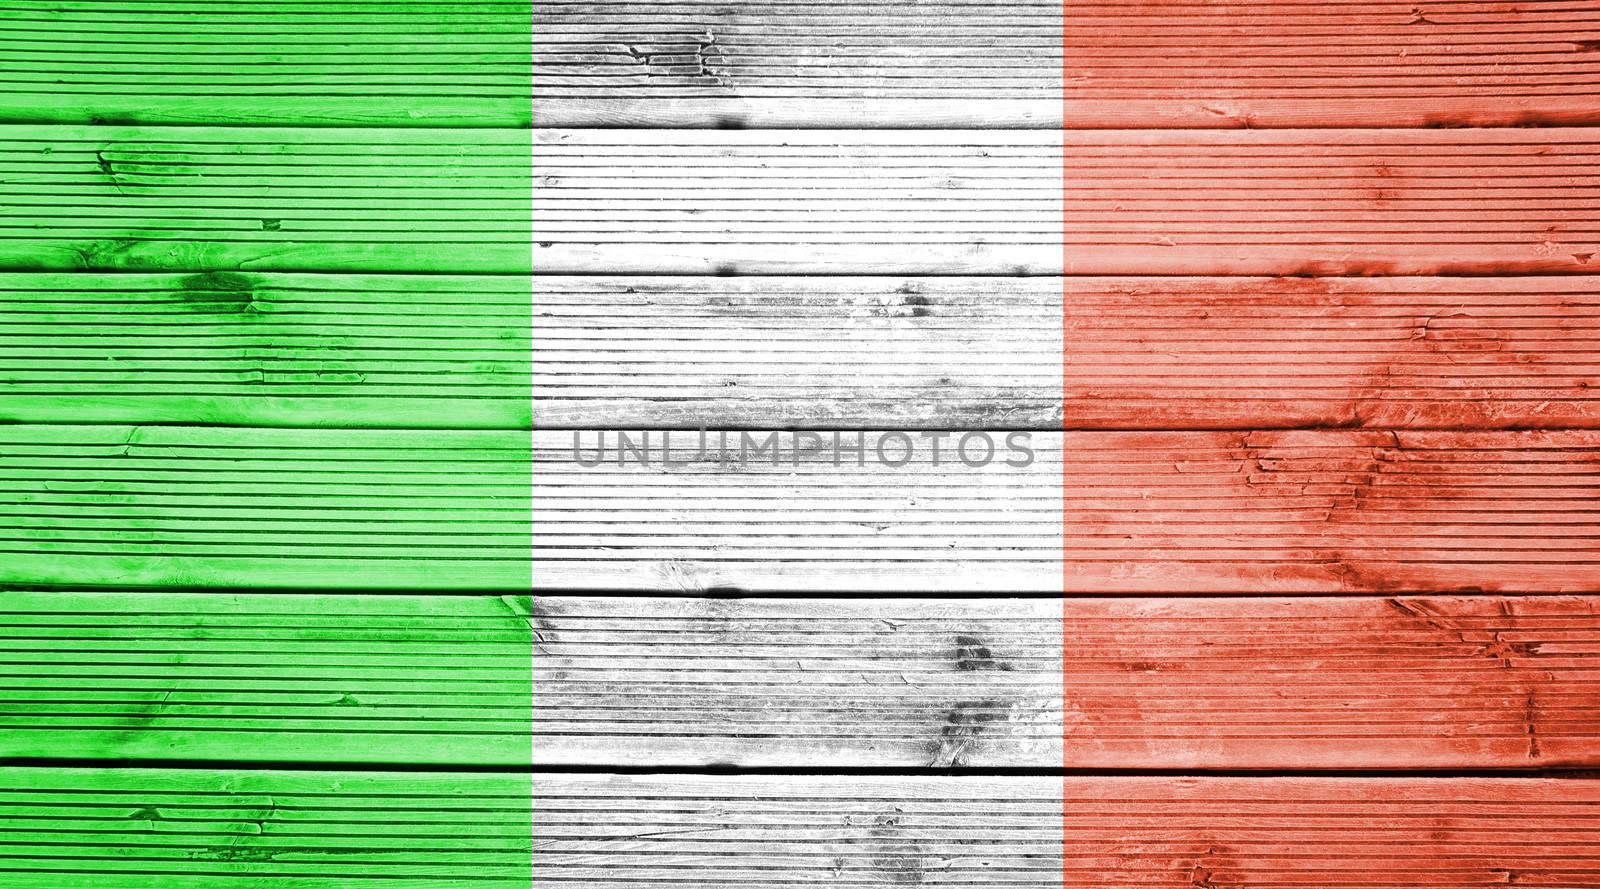 Natural wood planks texture background with the colors of the flag of Italy